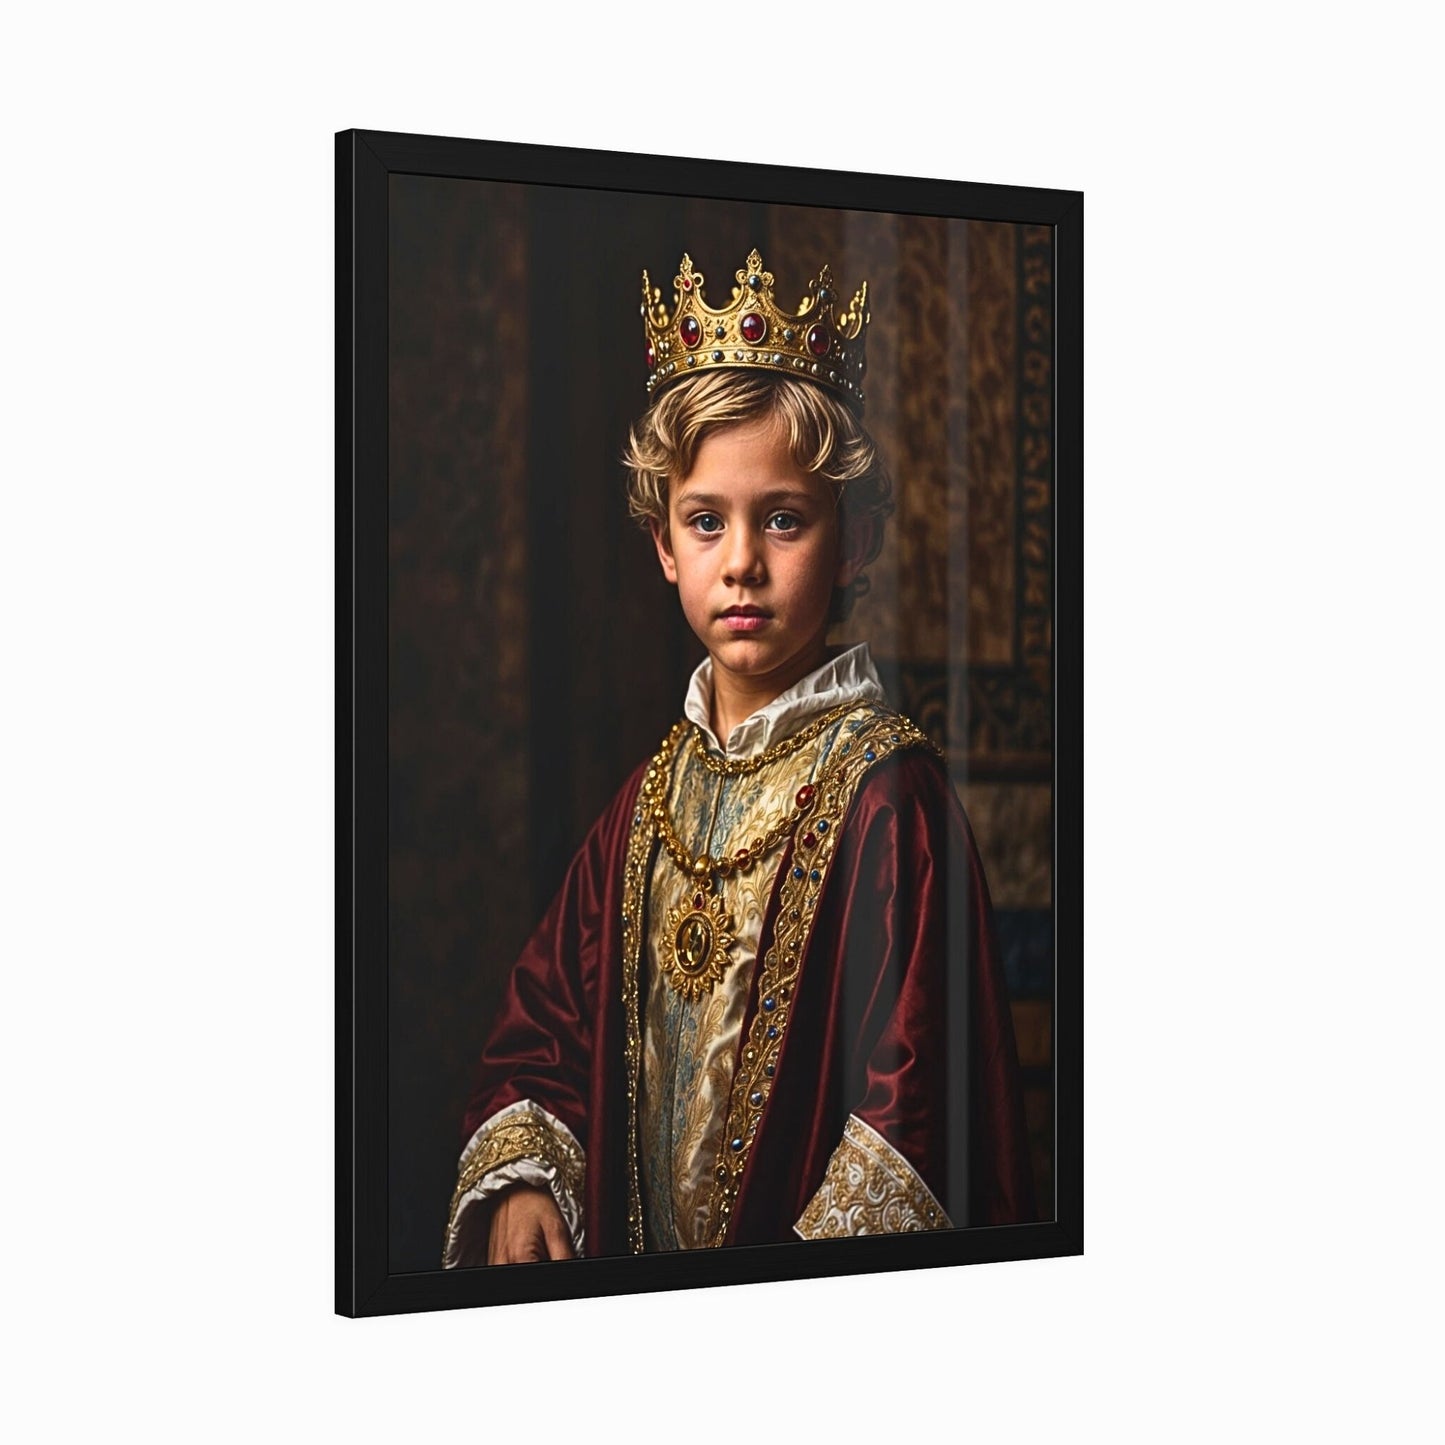 Transform your child's photo into a stunning royal portrait. Our custom portraits are perfect for birthdays, holidays, and special milestones. Celebrate your little Prince or Princess with personalized, Renaissance-inspired artwork that adds a touch of royalty to any room decor.